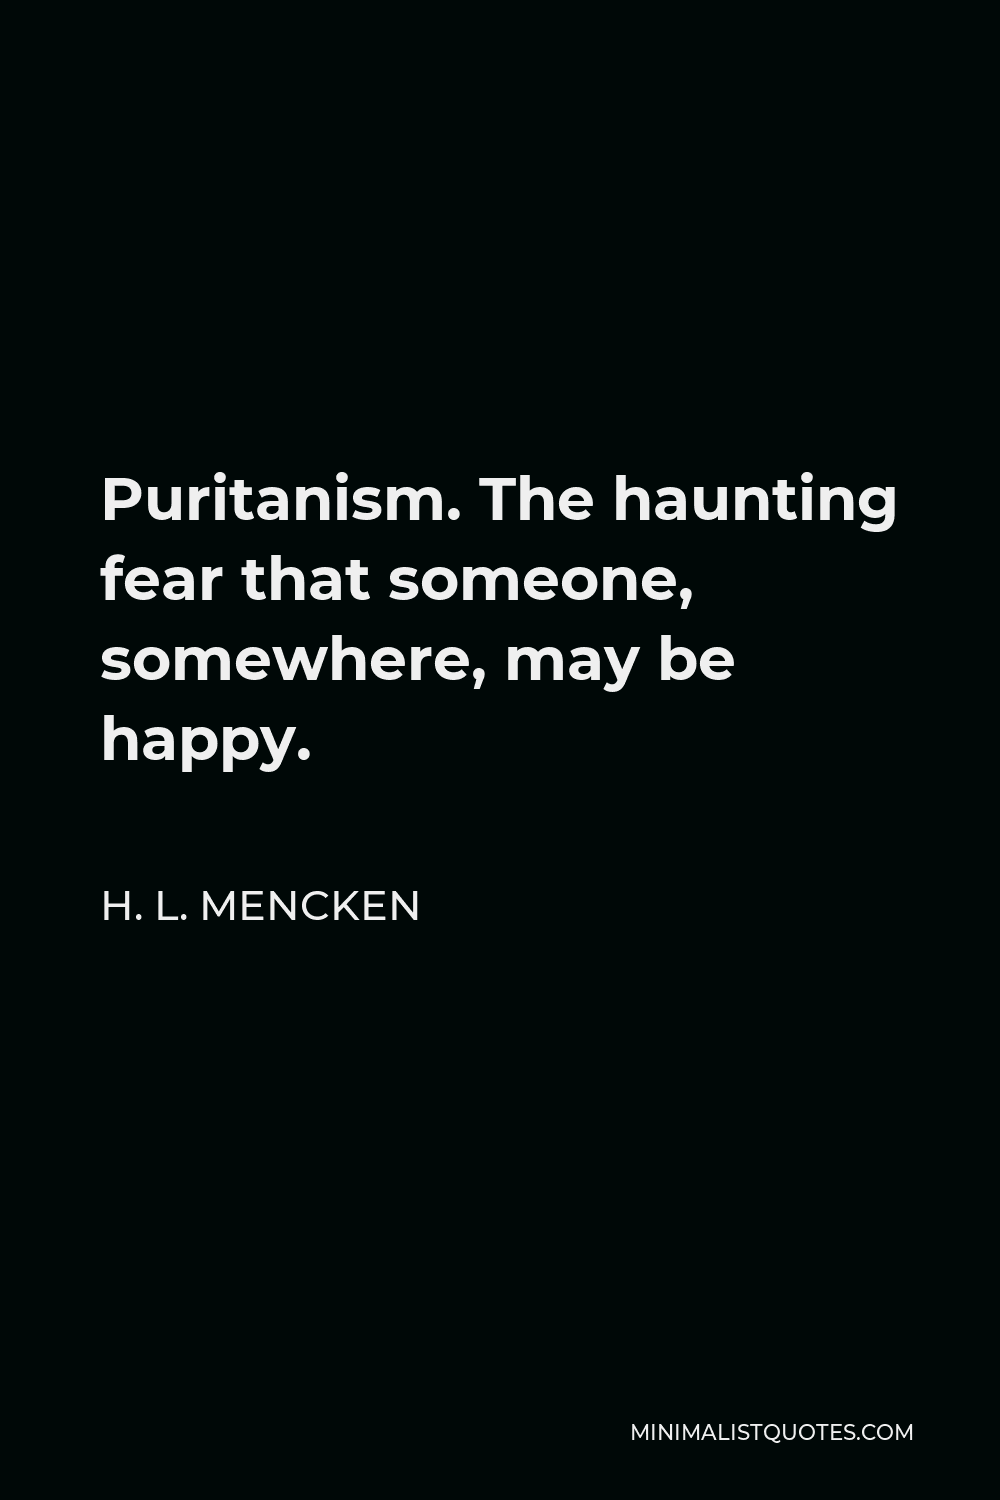 puritanism-the-haunting-fear-that-someone-somewher.jpg